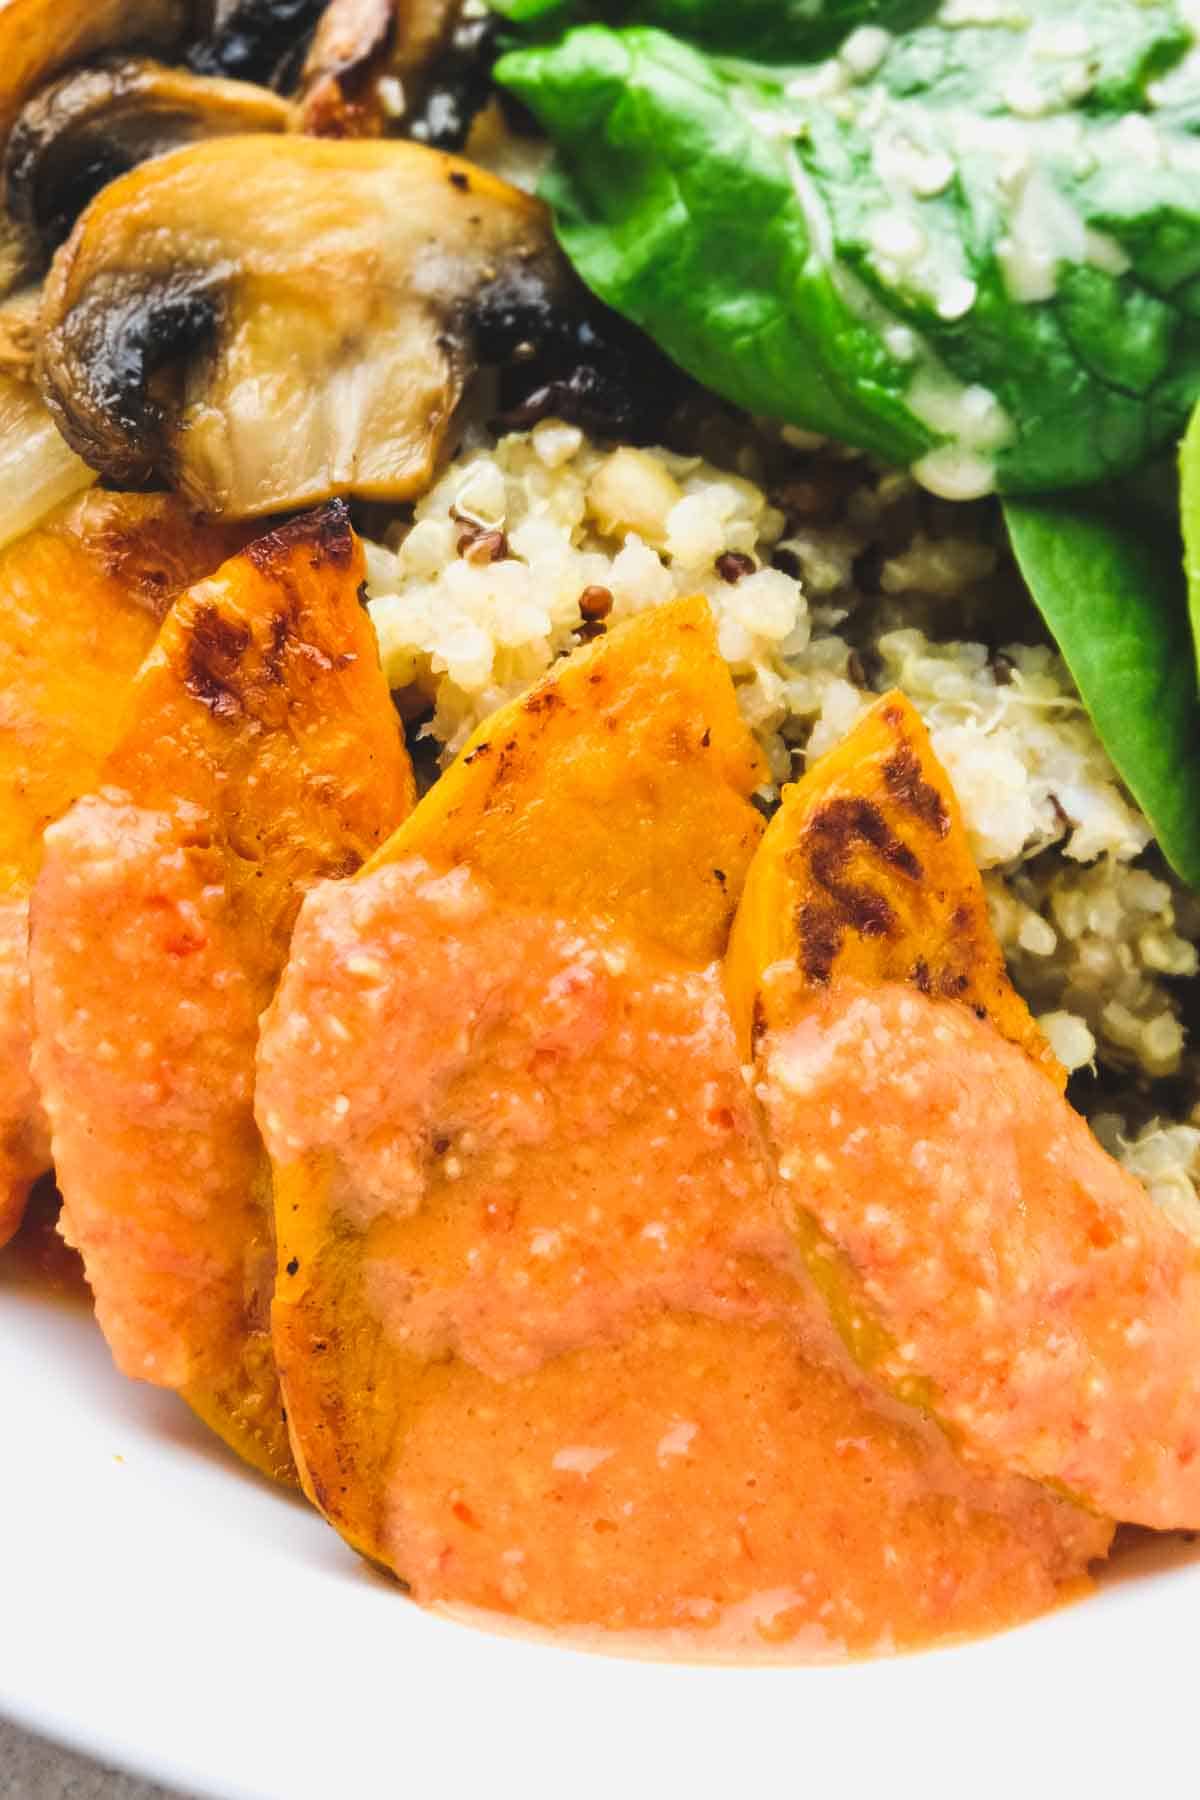 Red pepper miso dressing as a topping for roasted sweet potatoes in a buddha bowl vegan recipe.